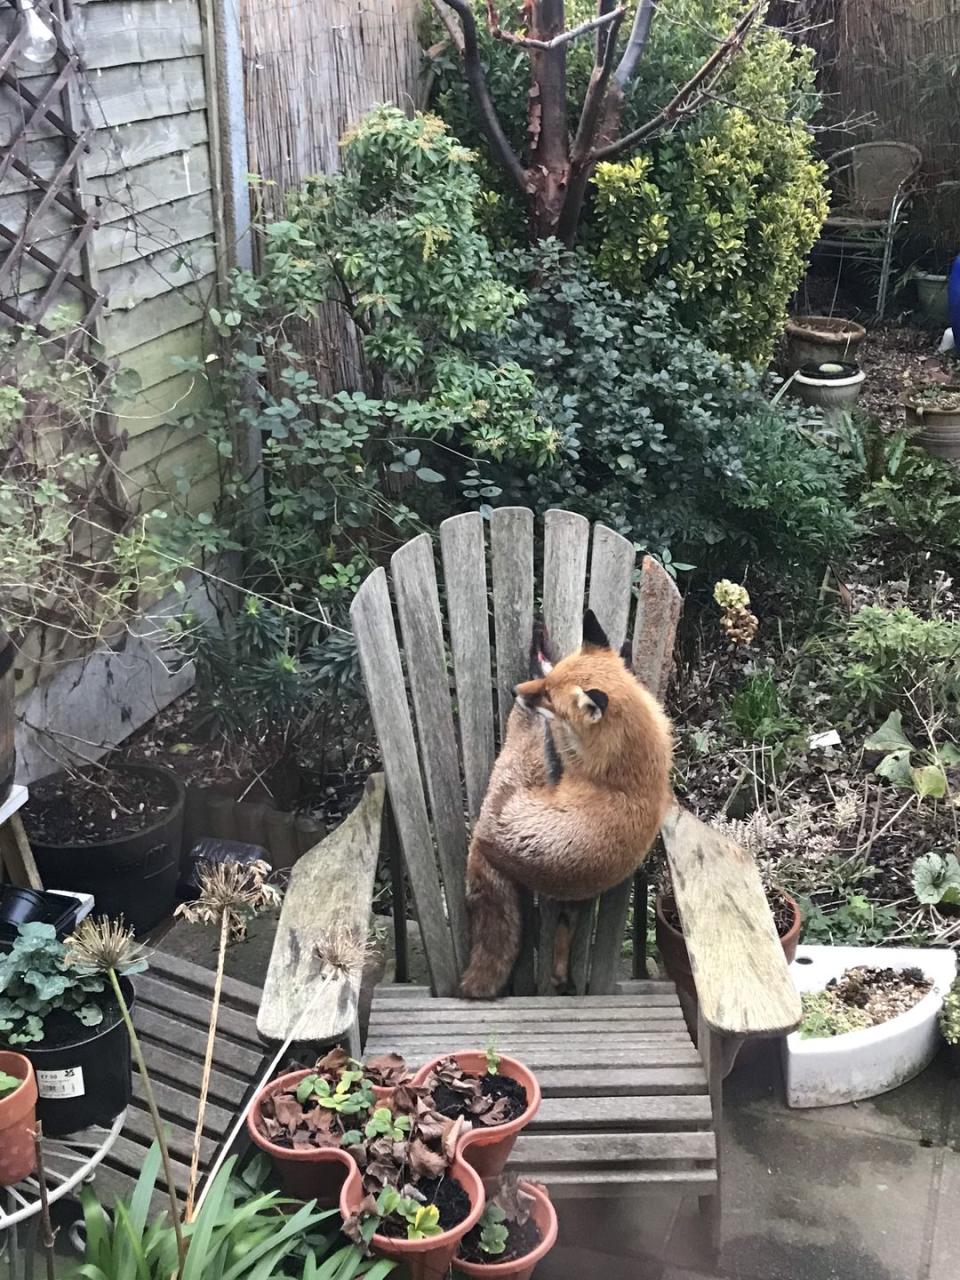 <p>One curious fox got himself in a bit of a pickle when adventuring through a garden in London. While climbing over furniture, he got his foot stuck in the slats of a wooden chair. </p><p>RSPCA rescuer, Francesca Tambini, said: "It wasn't a good start to the year for this little foxy when he got his leg stuck in the back of a chair. Thankfully I was able to slide him out of the fix but he had deep cuts on his paws and was struggling to walk so I took him to a wildlife centre for some TLC before he could be released back to the wild."</p>